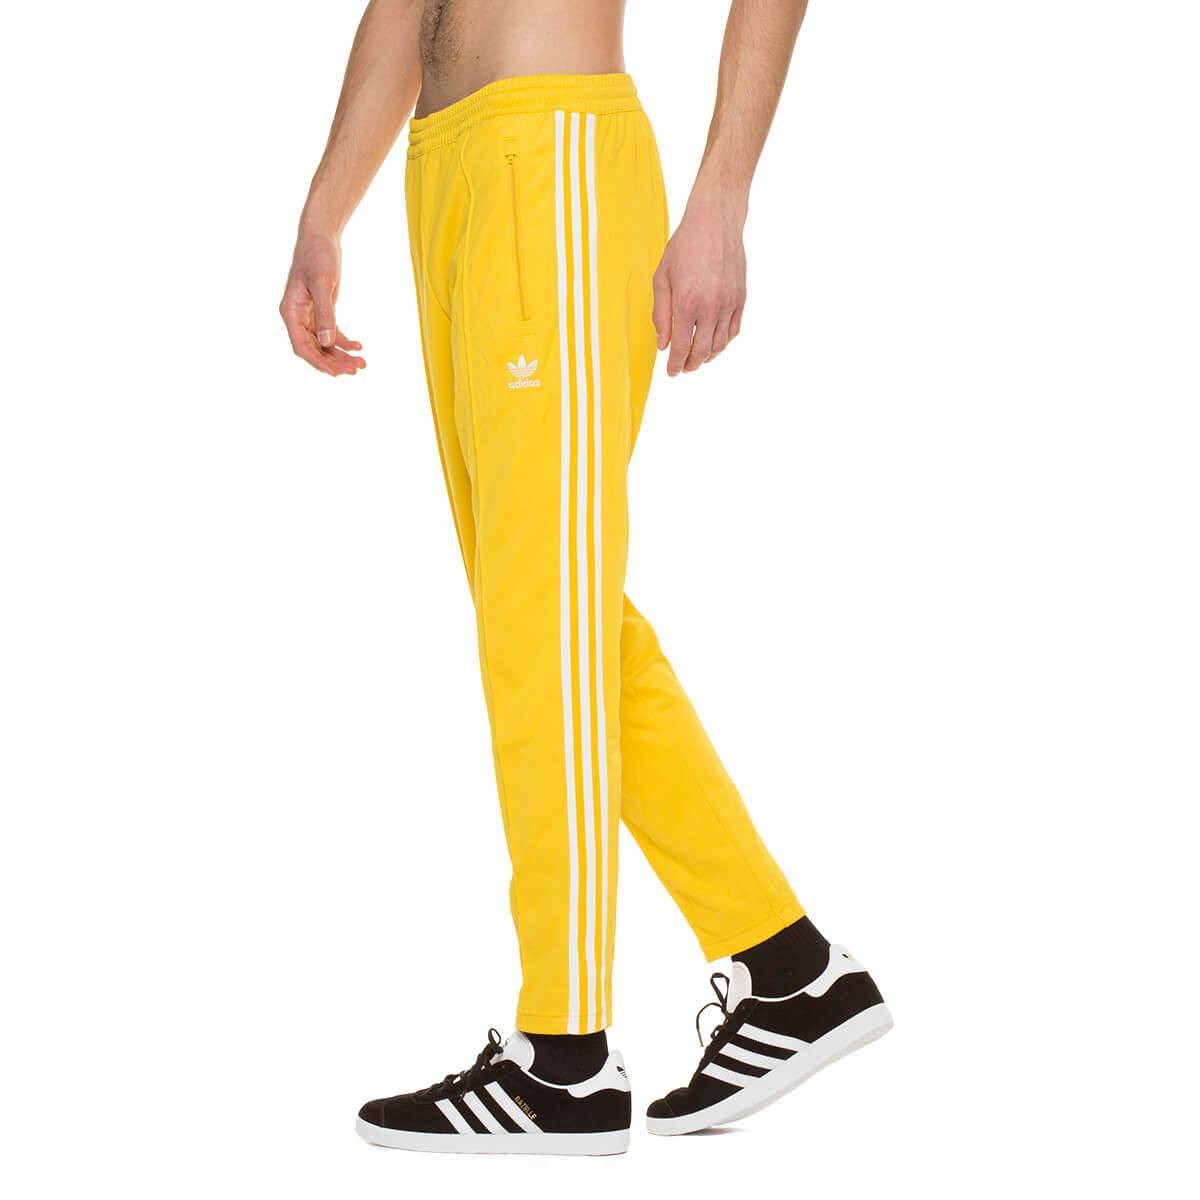 adidas yellow trousers